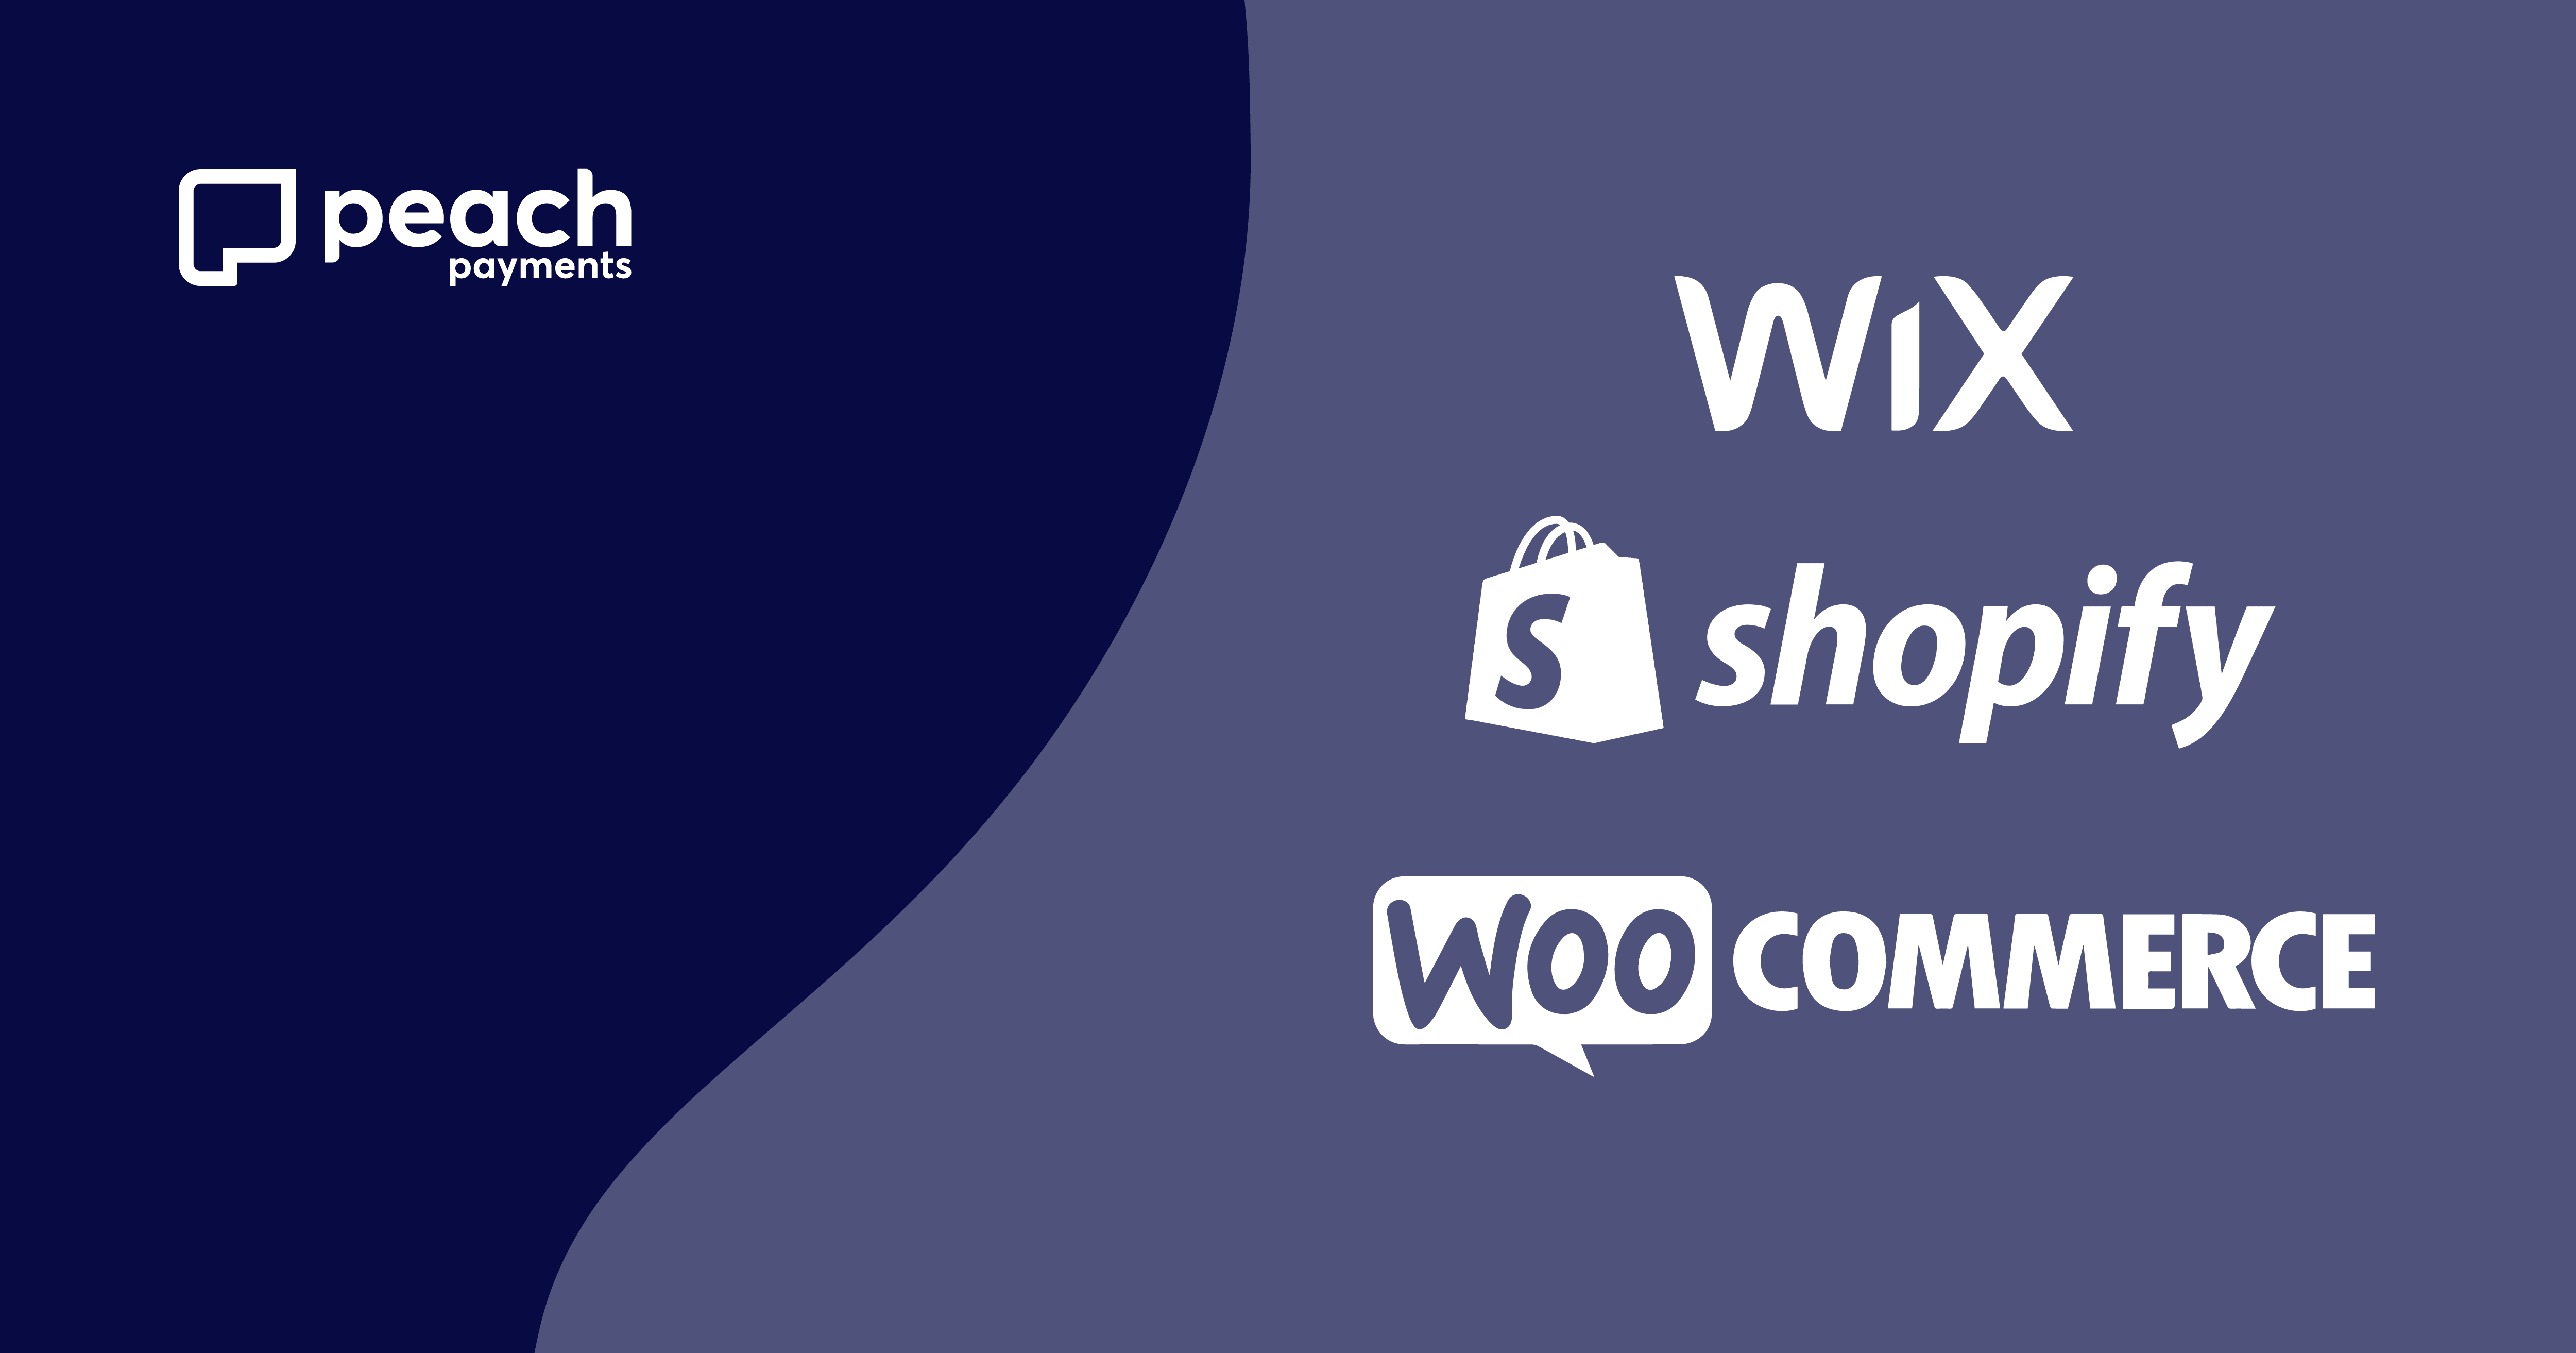 The best help for Wix, WooCommerce and Shopify in 2021